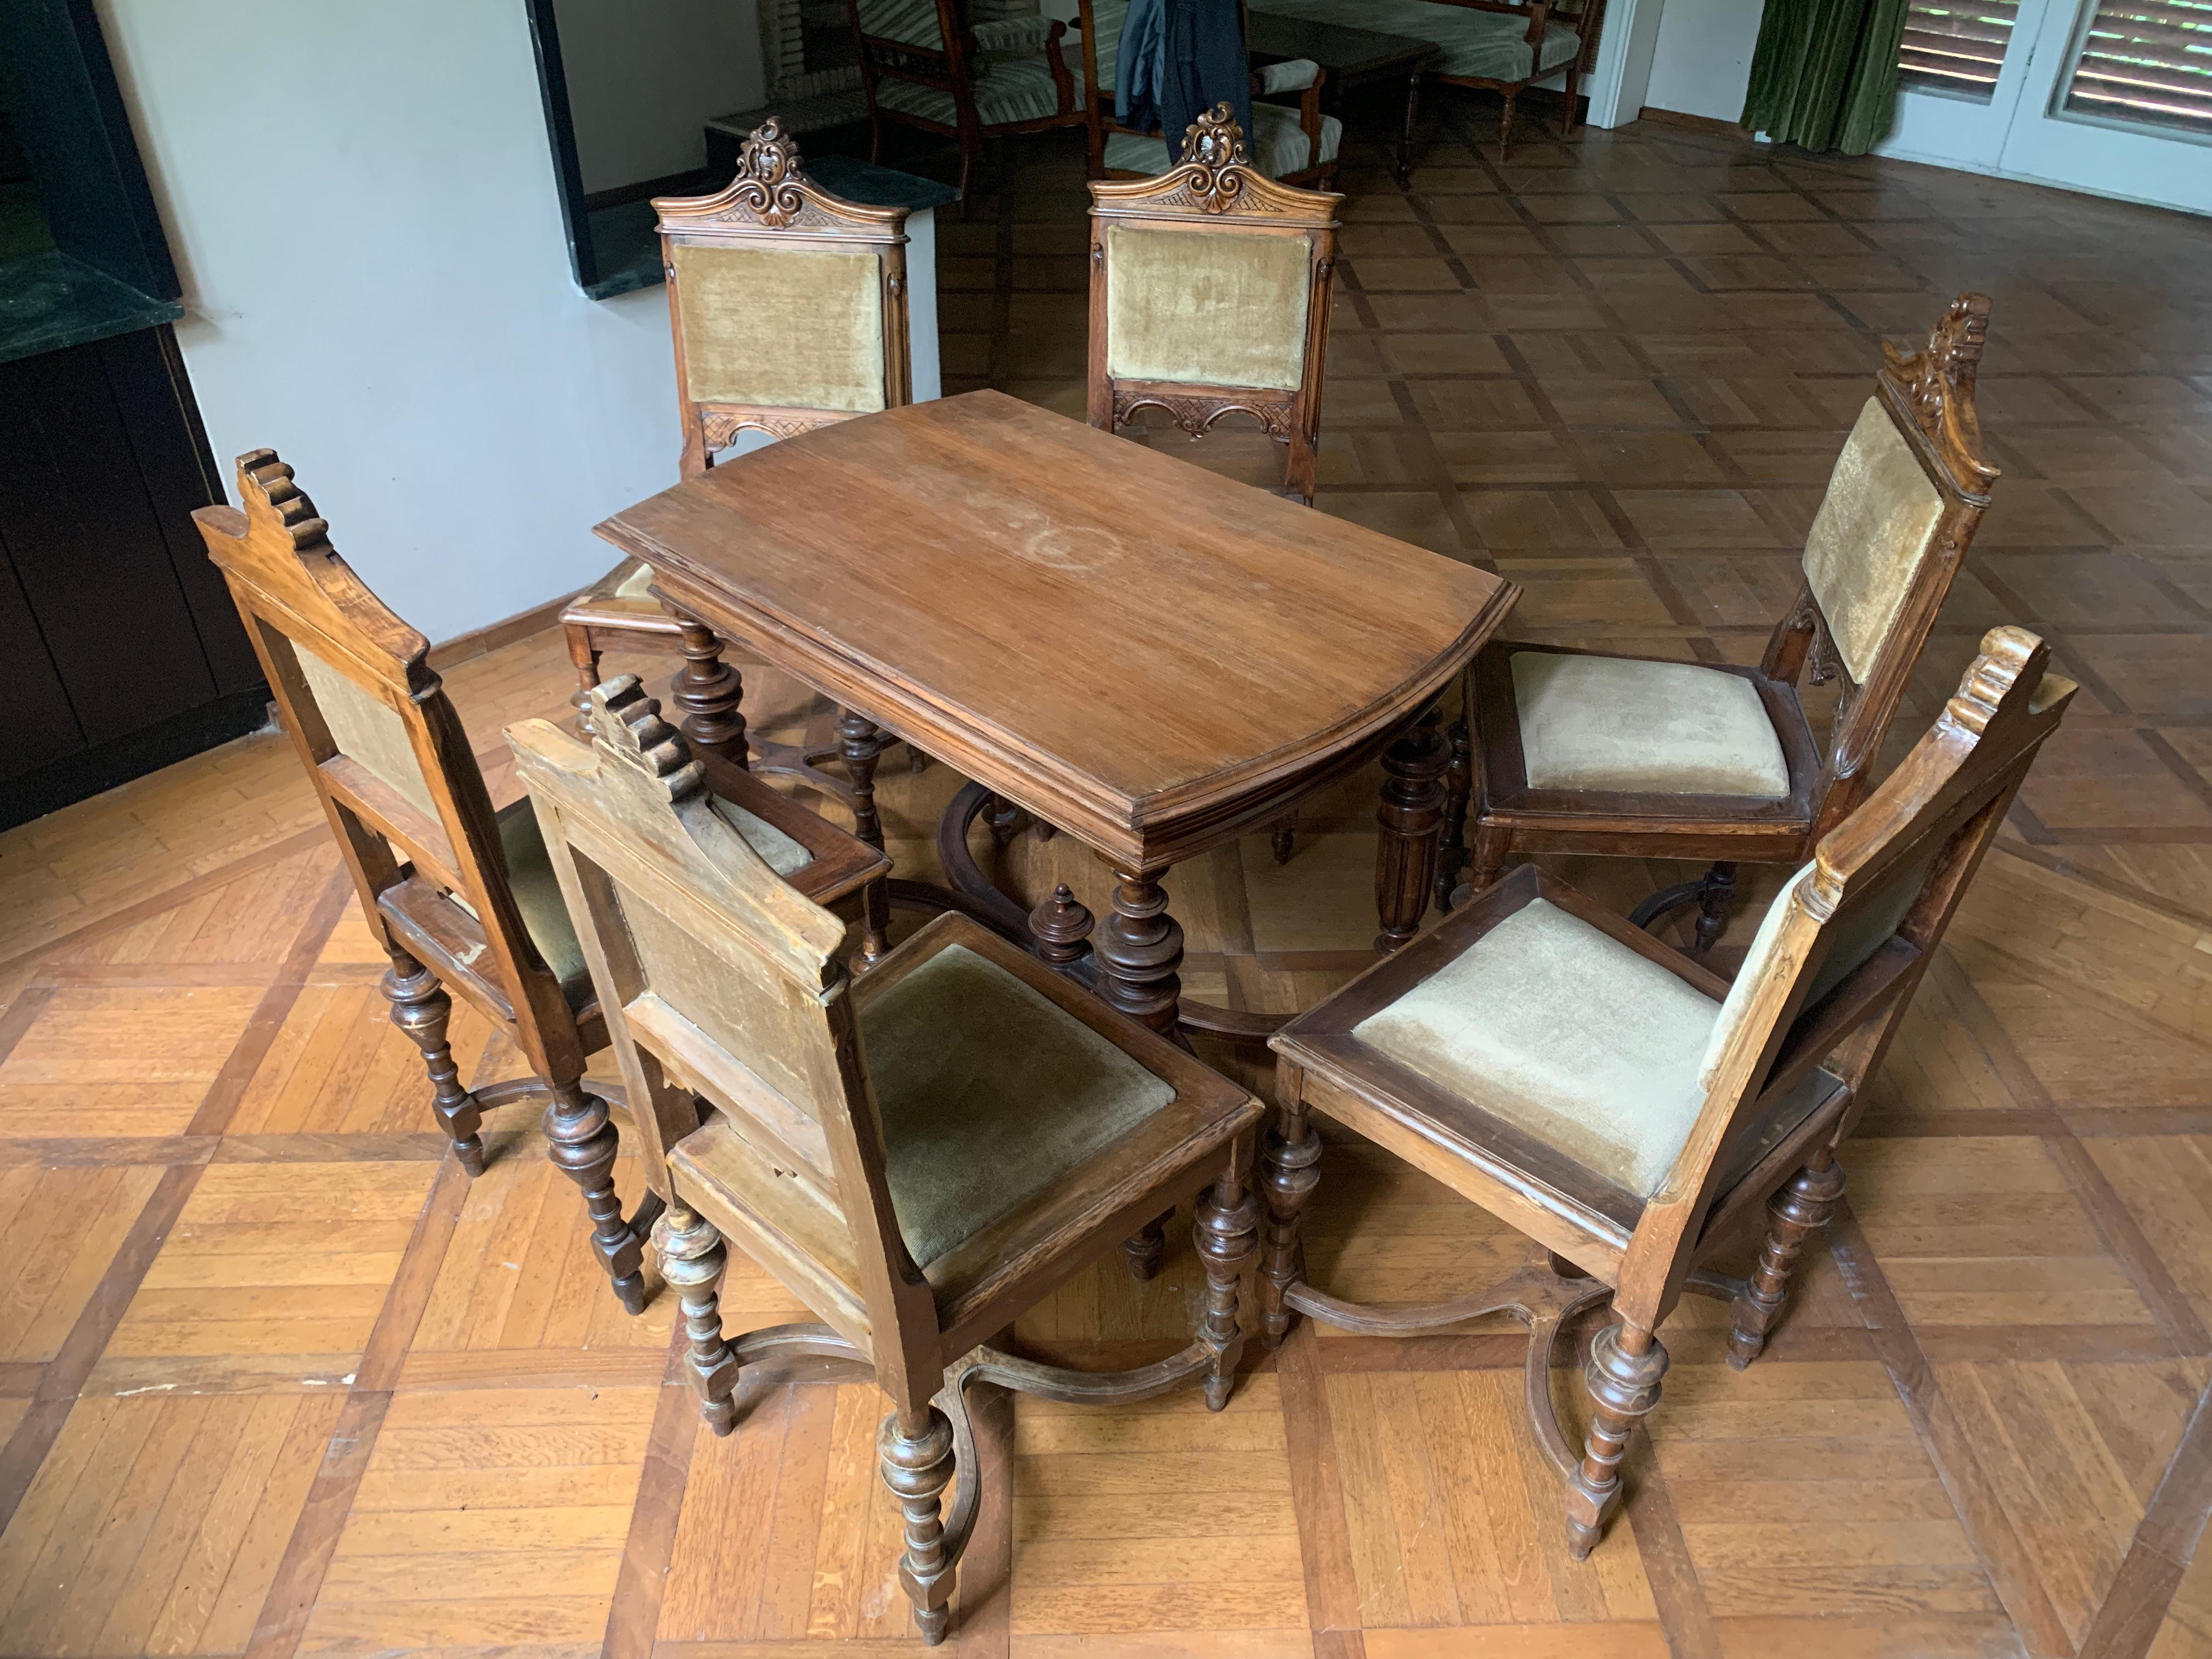 Middle size table with six chairs with beautiful floral carvings and the original upholstery.
France, circa 1920.